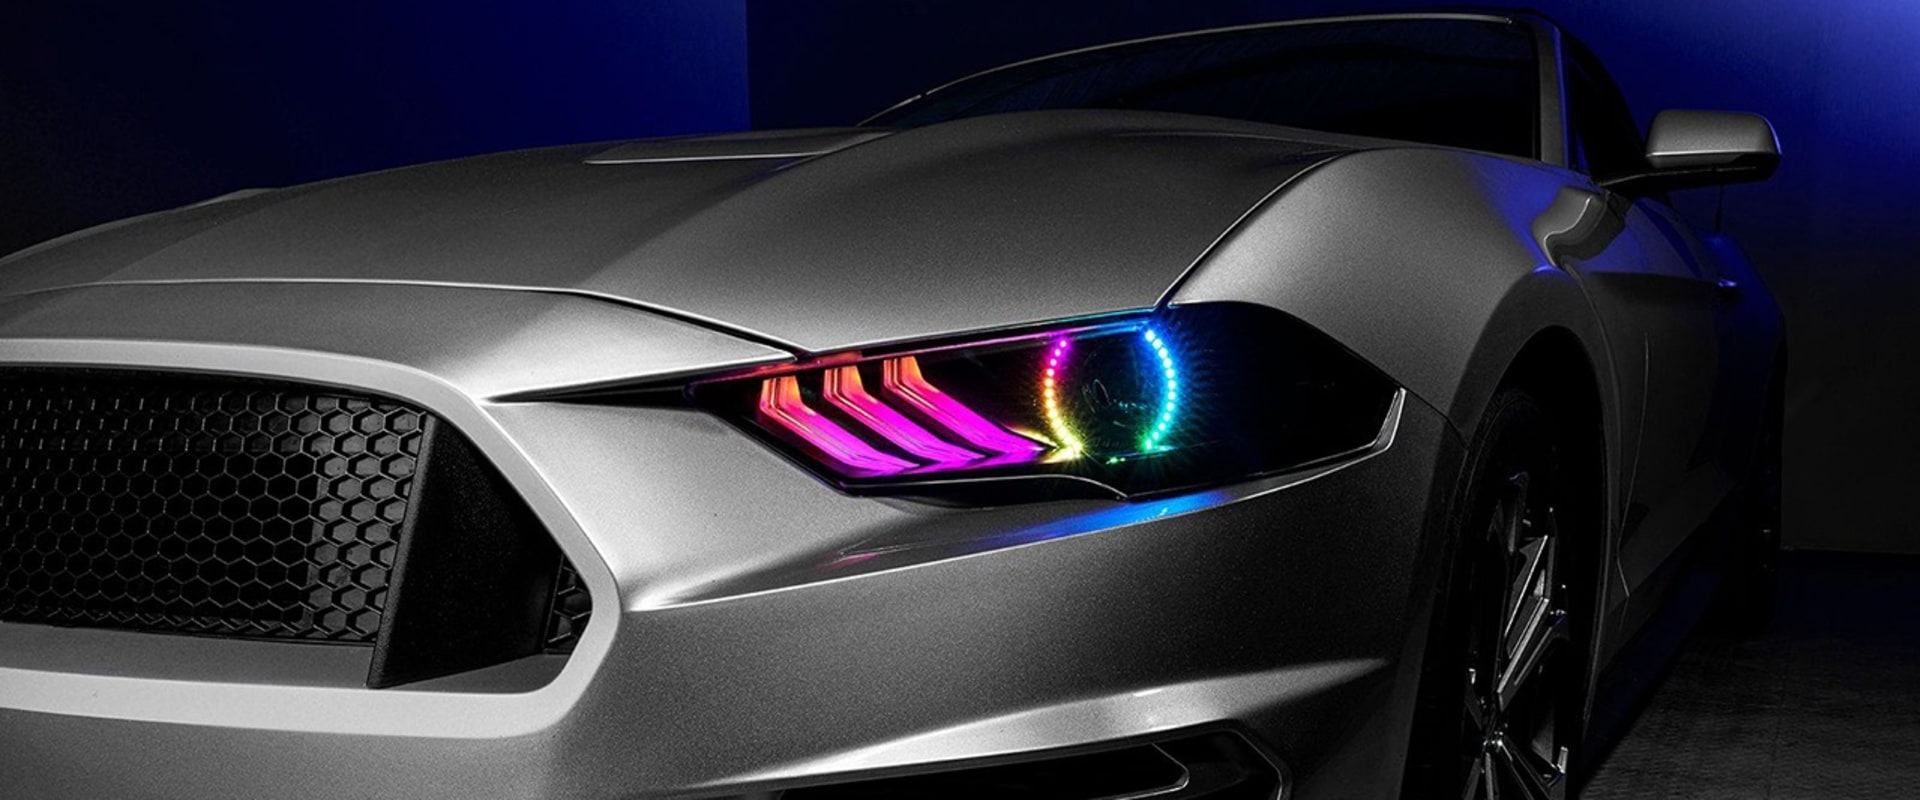 Lighting Systems for GT Cars